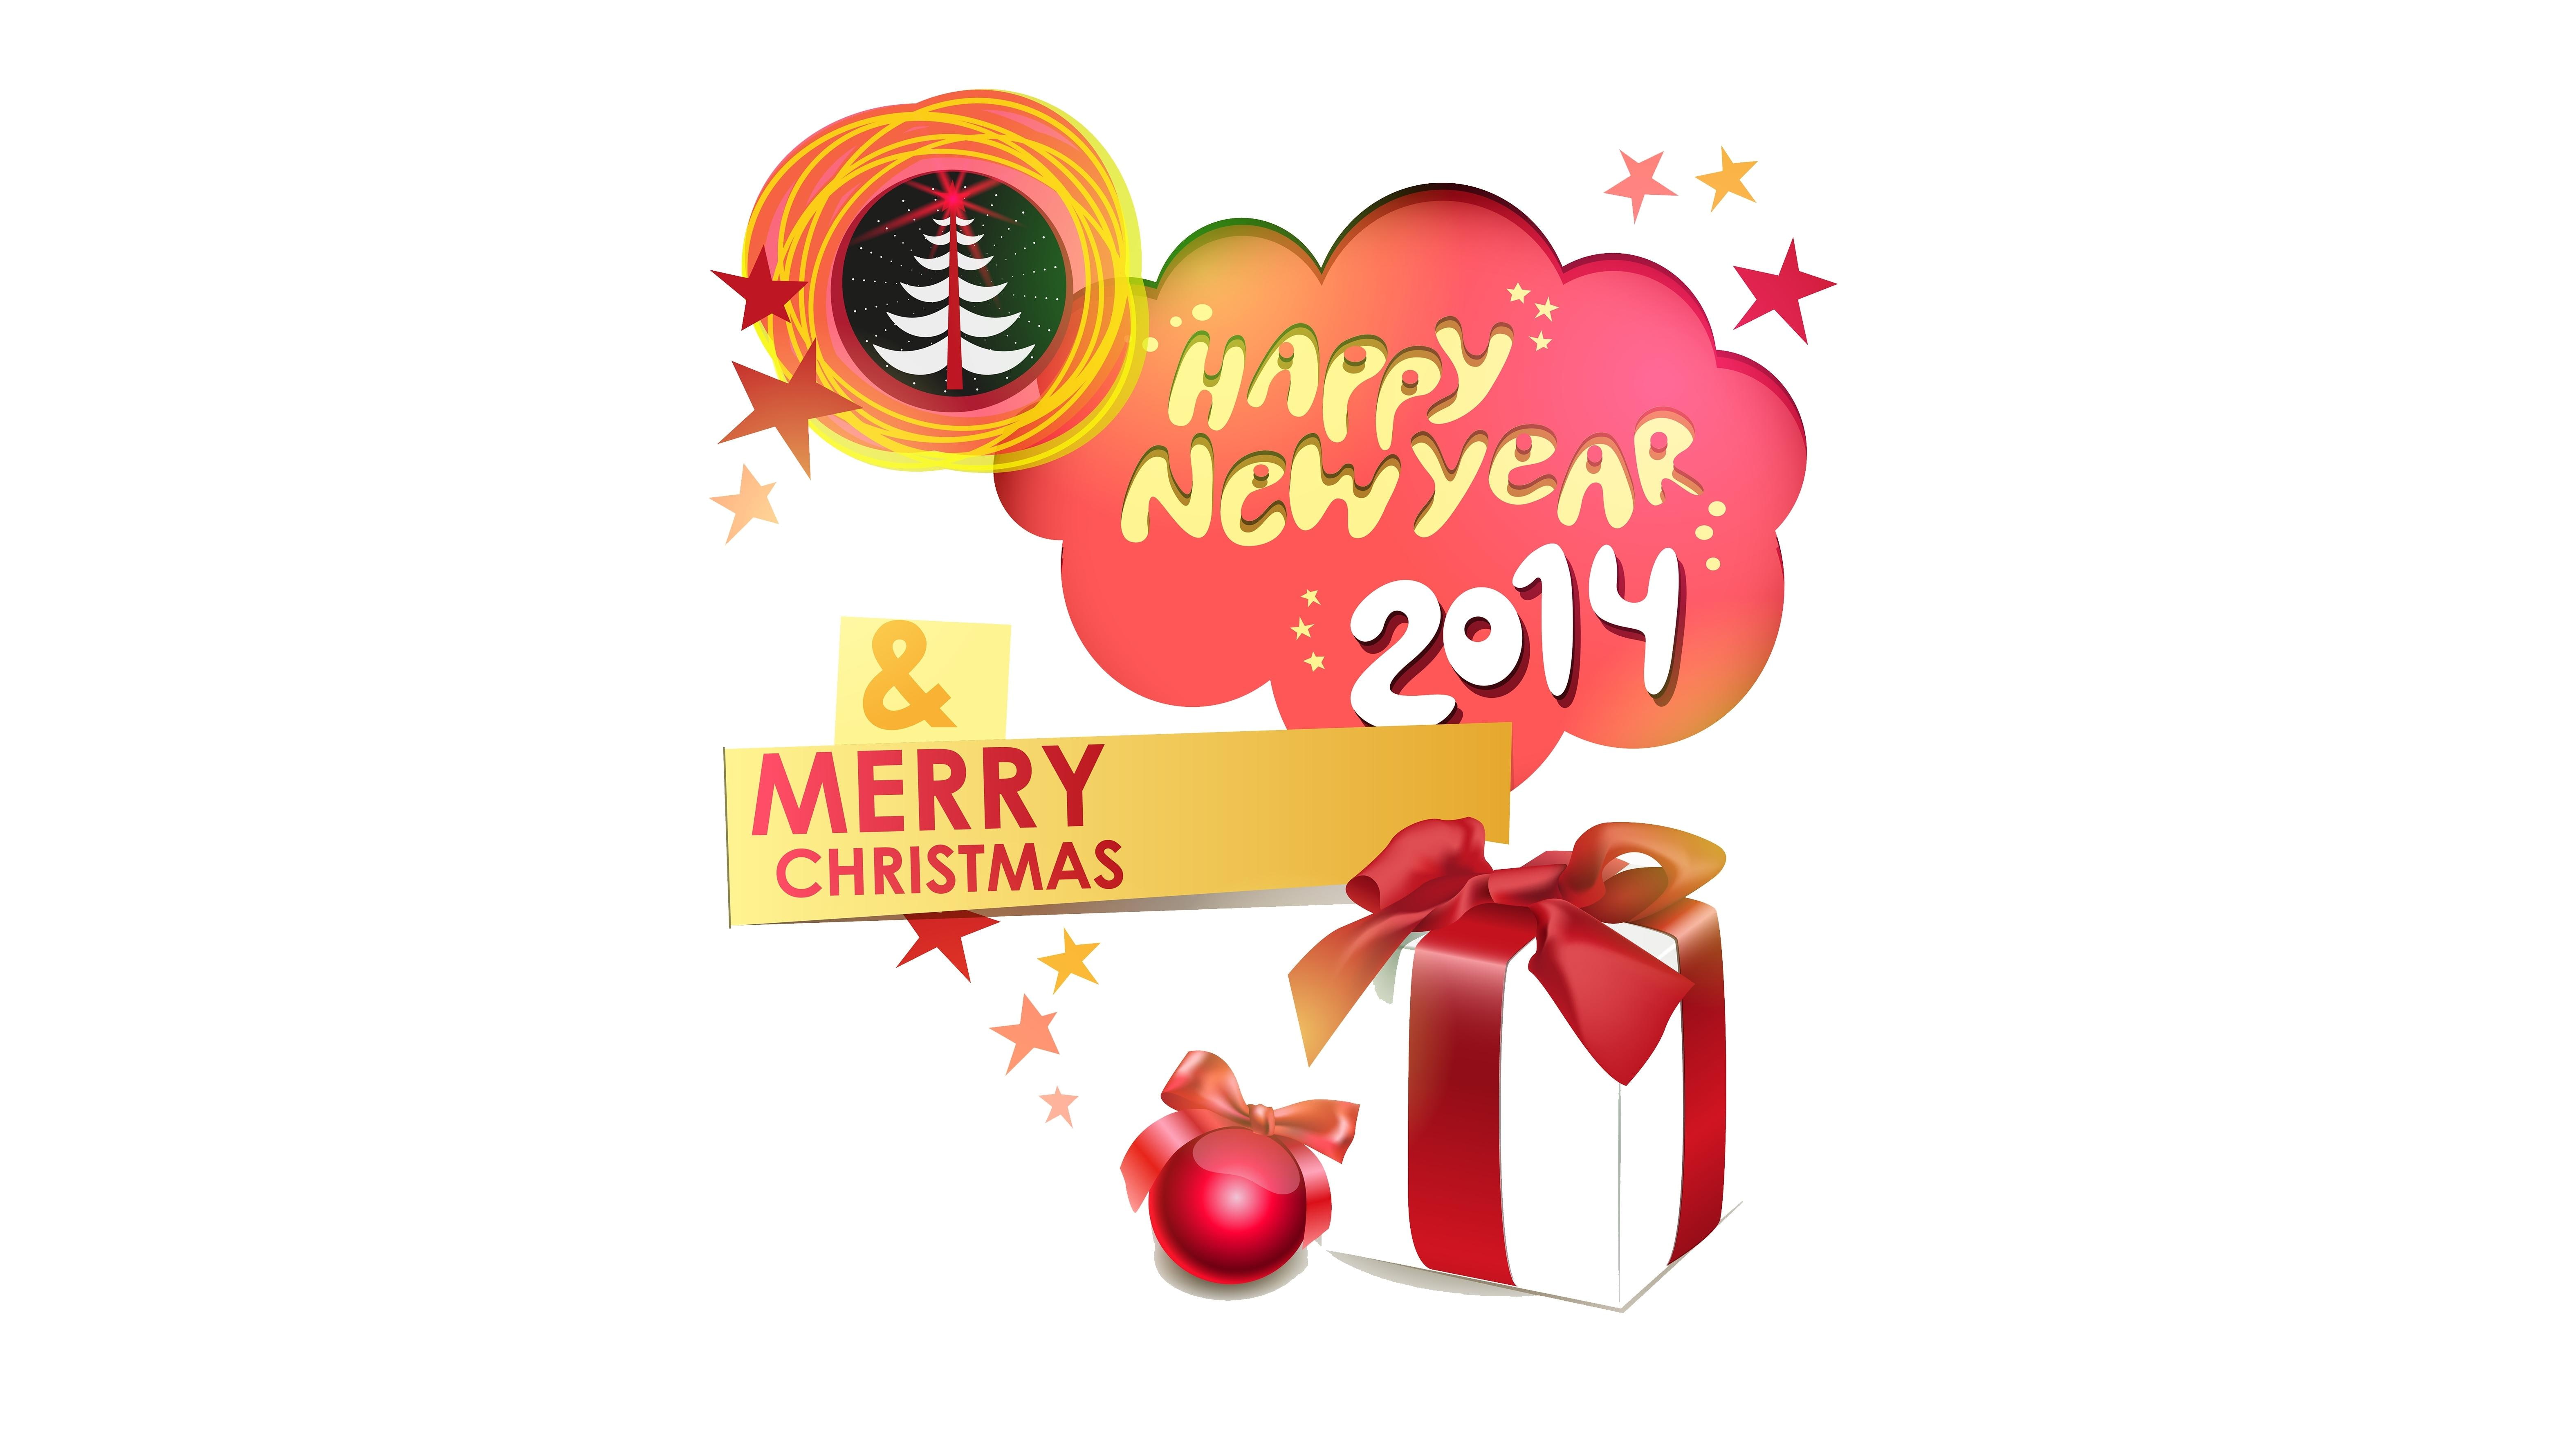 New Year 2014 & Merry Christmas, happy new year 2014 & merry christmas